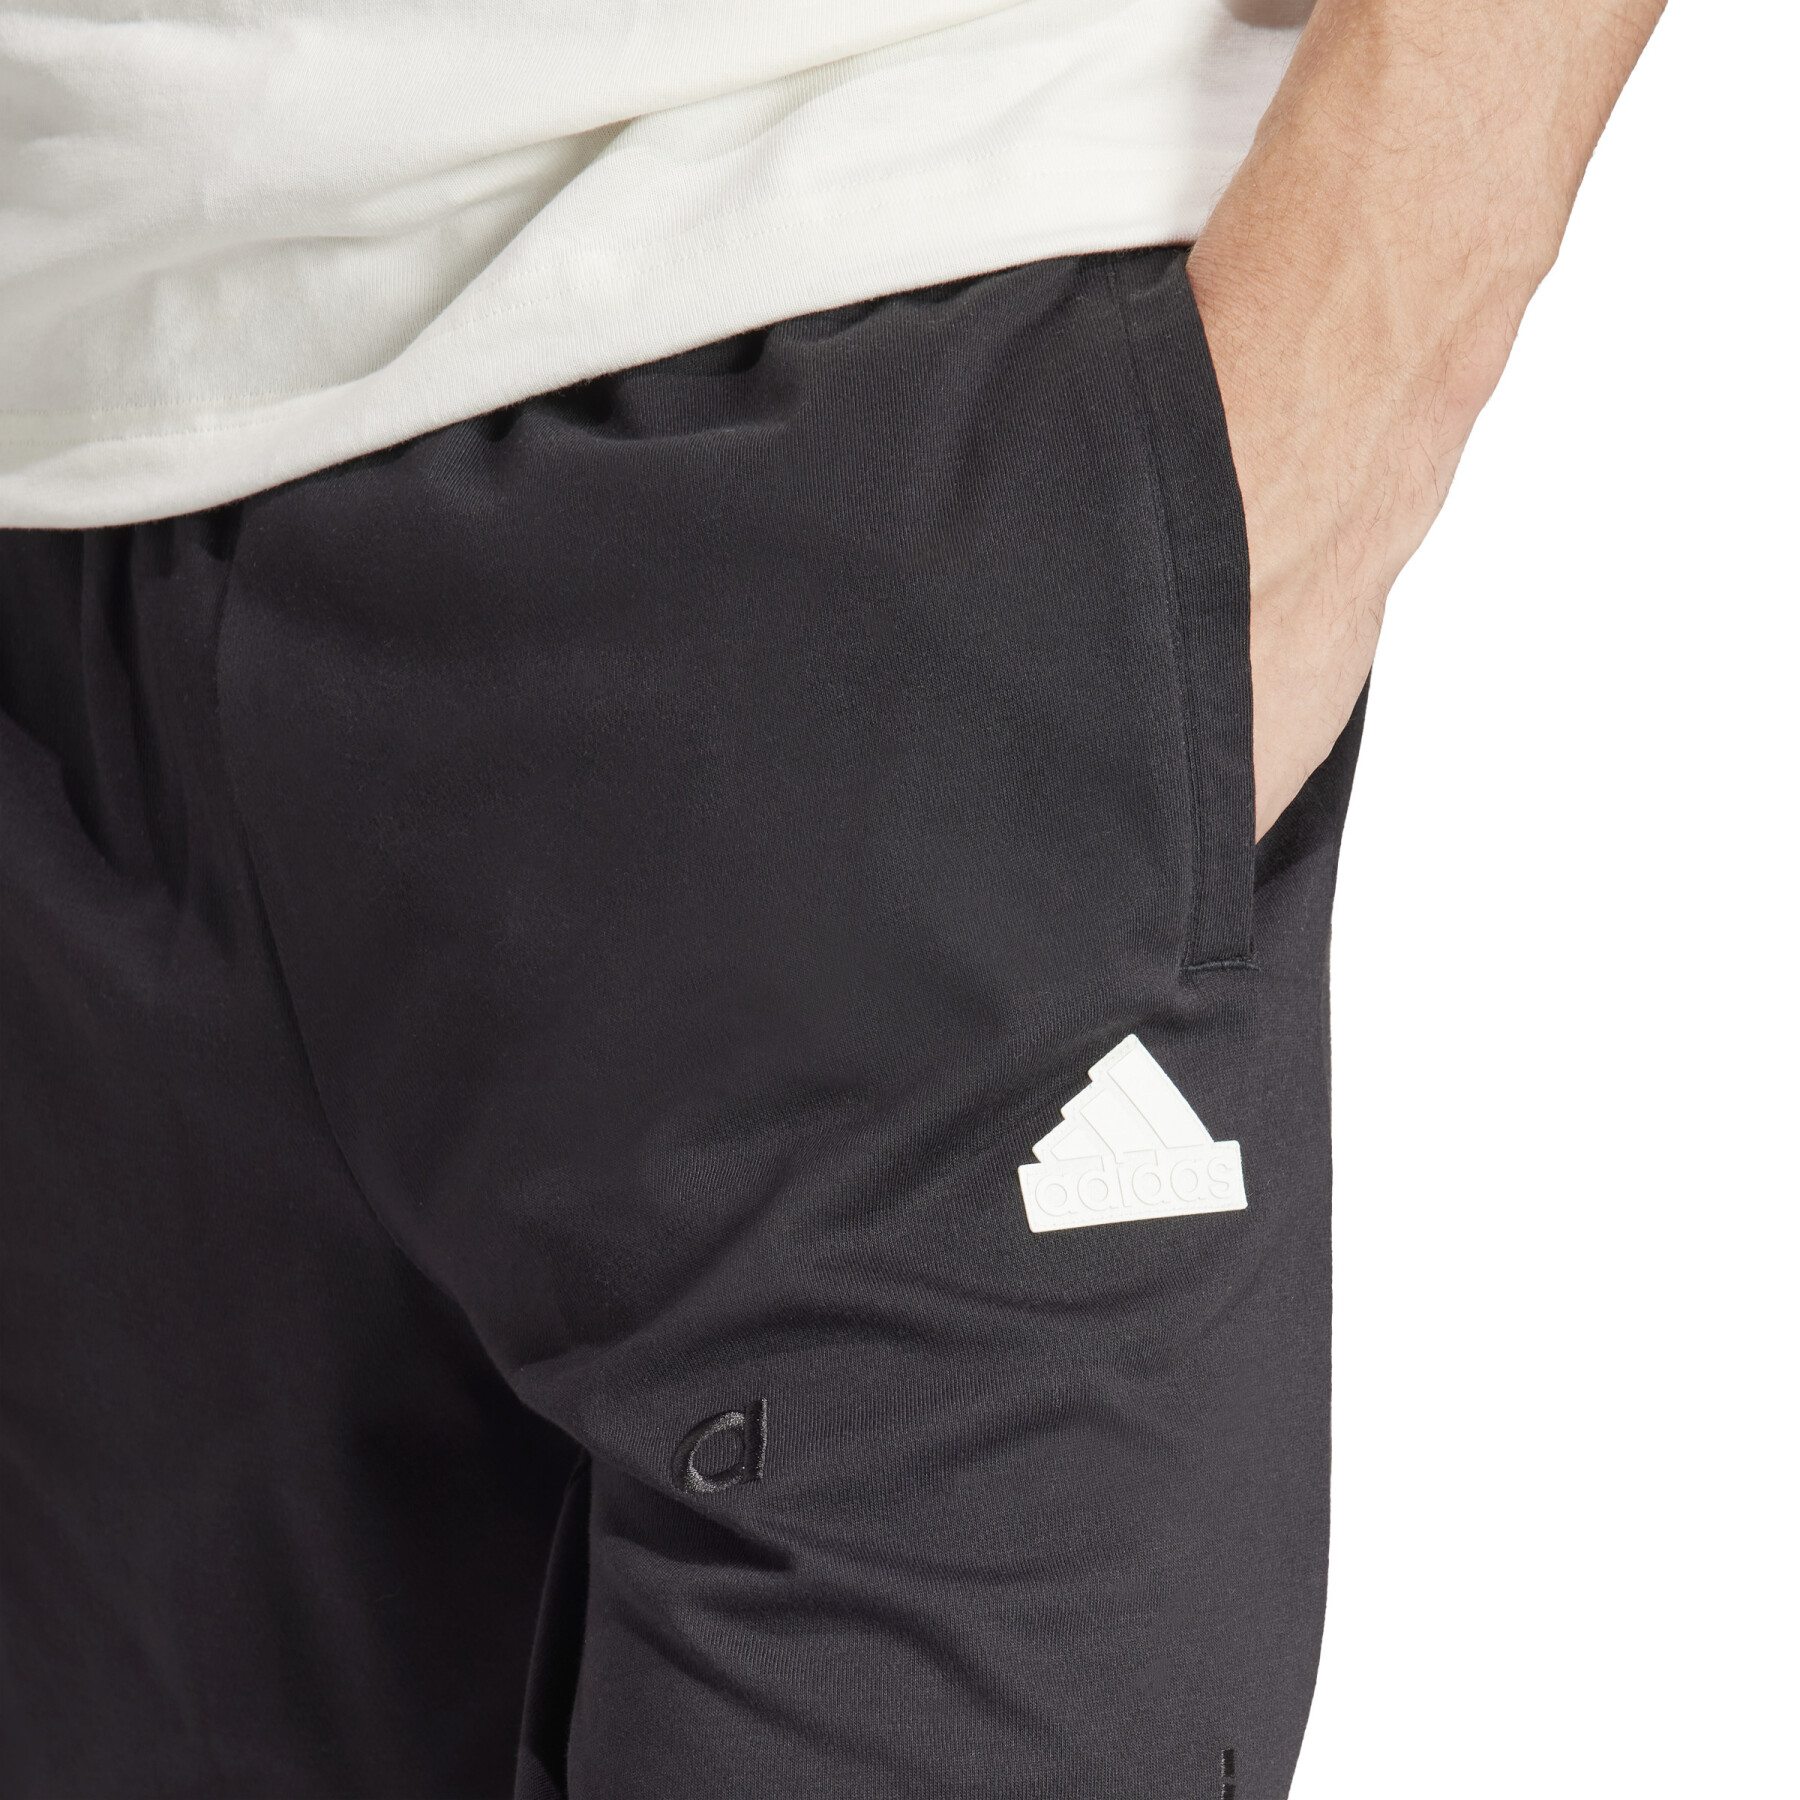 Embroidered shorts adidas